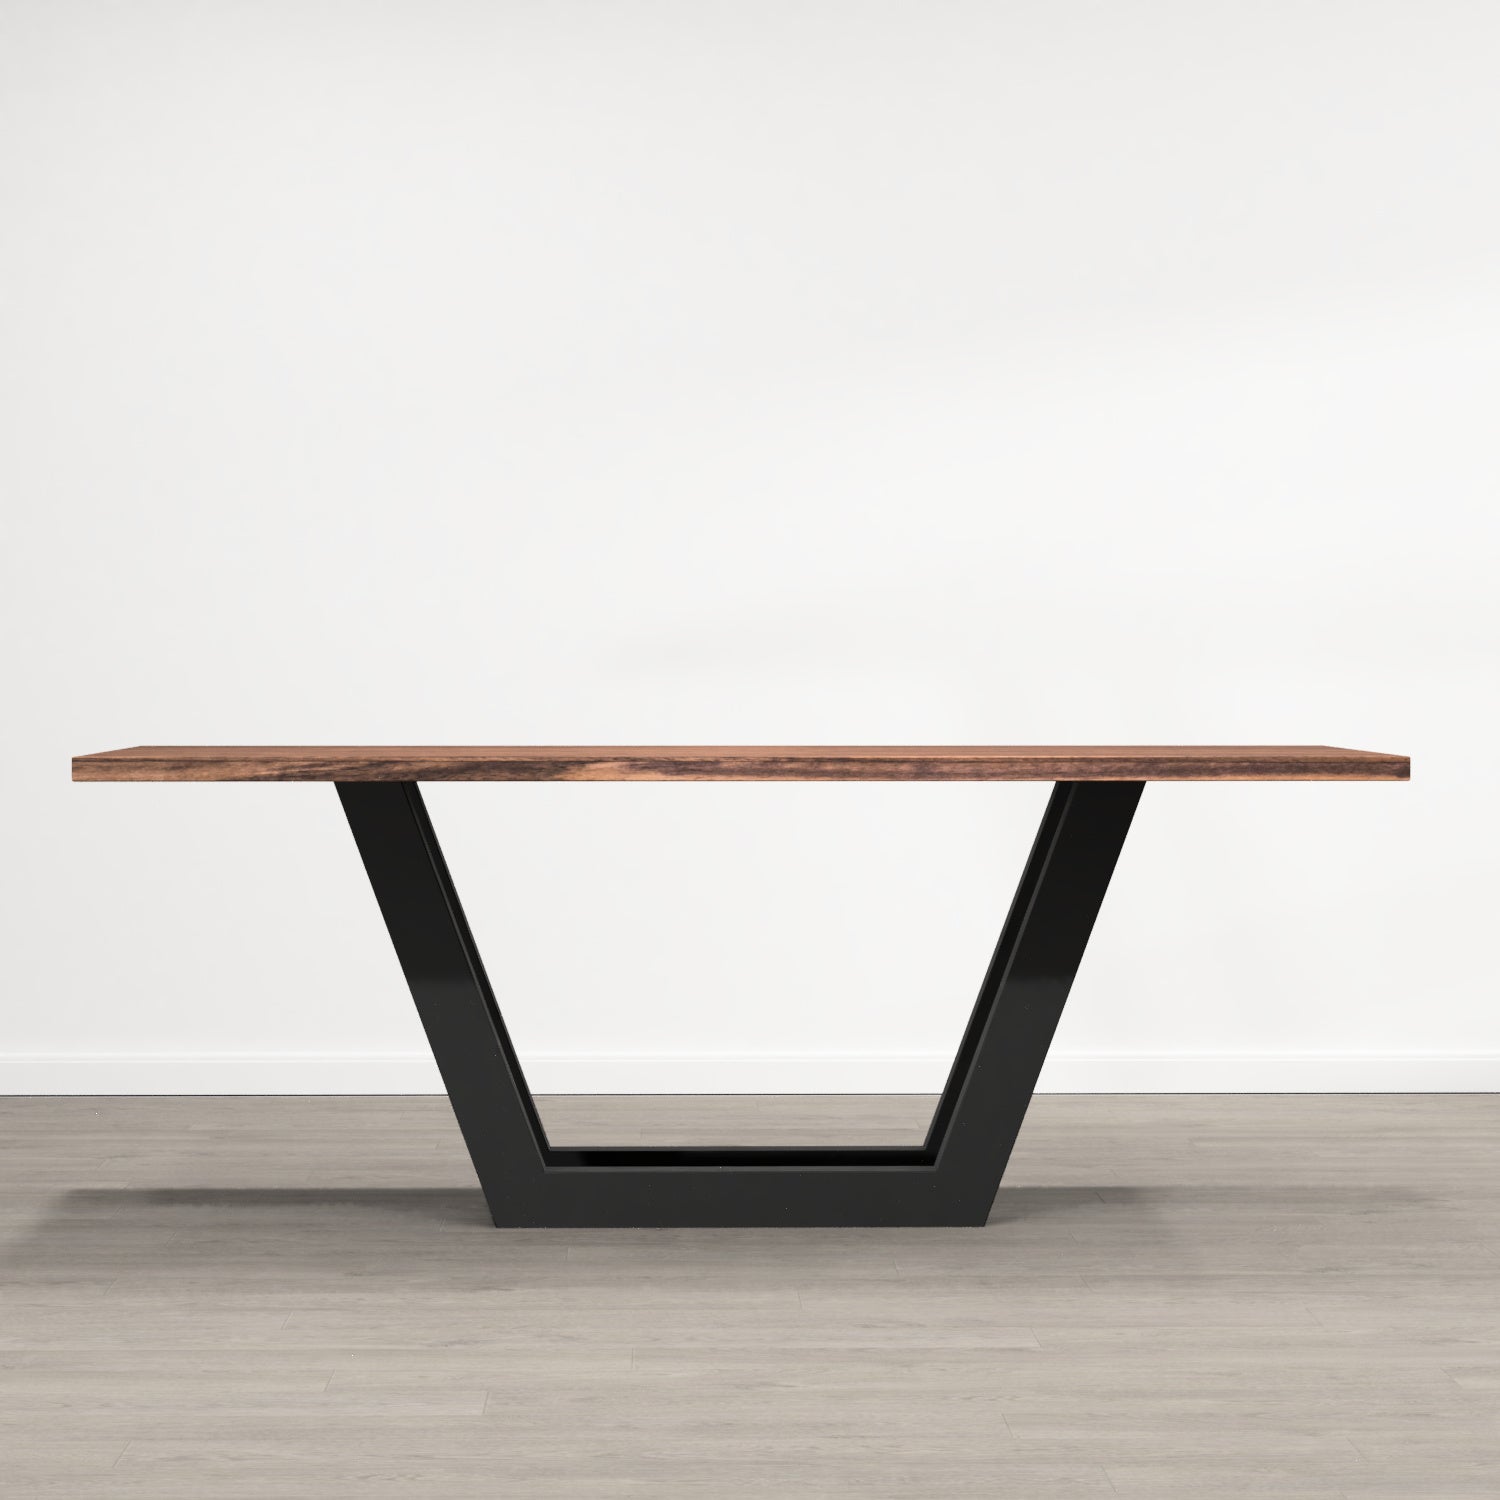 The Addison Dining Table - FargoWoodworks